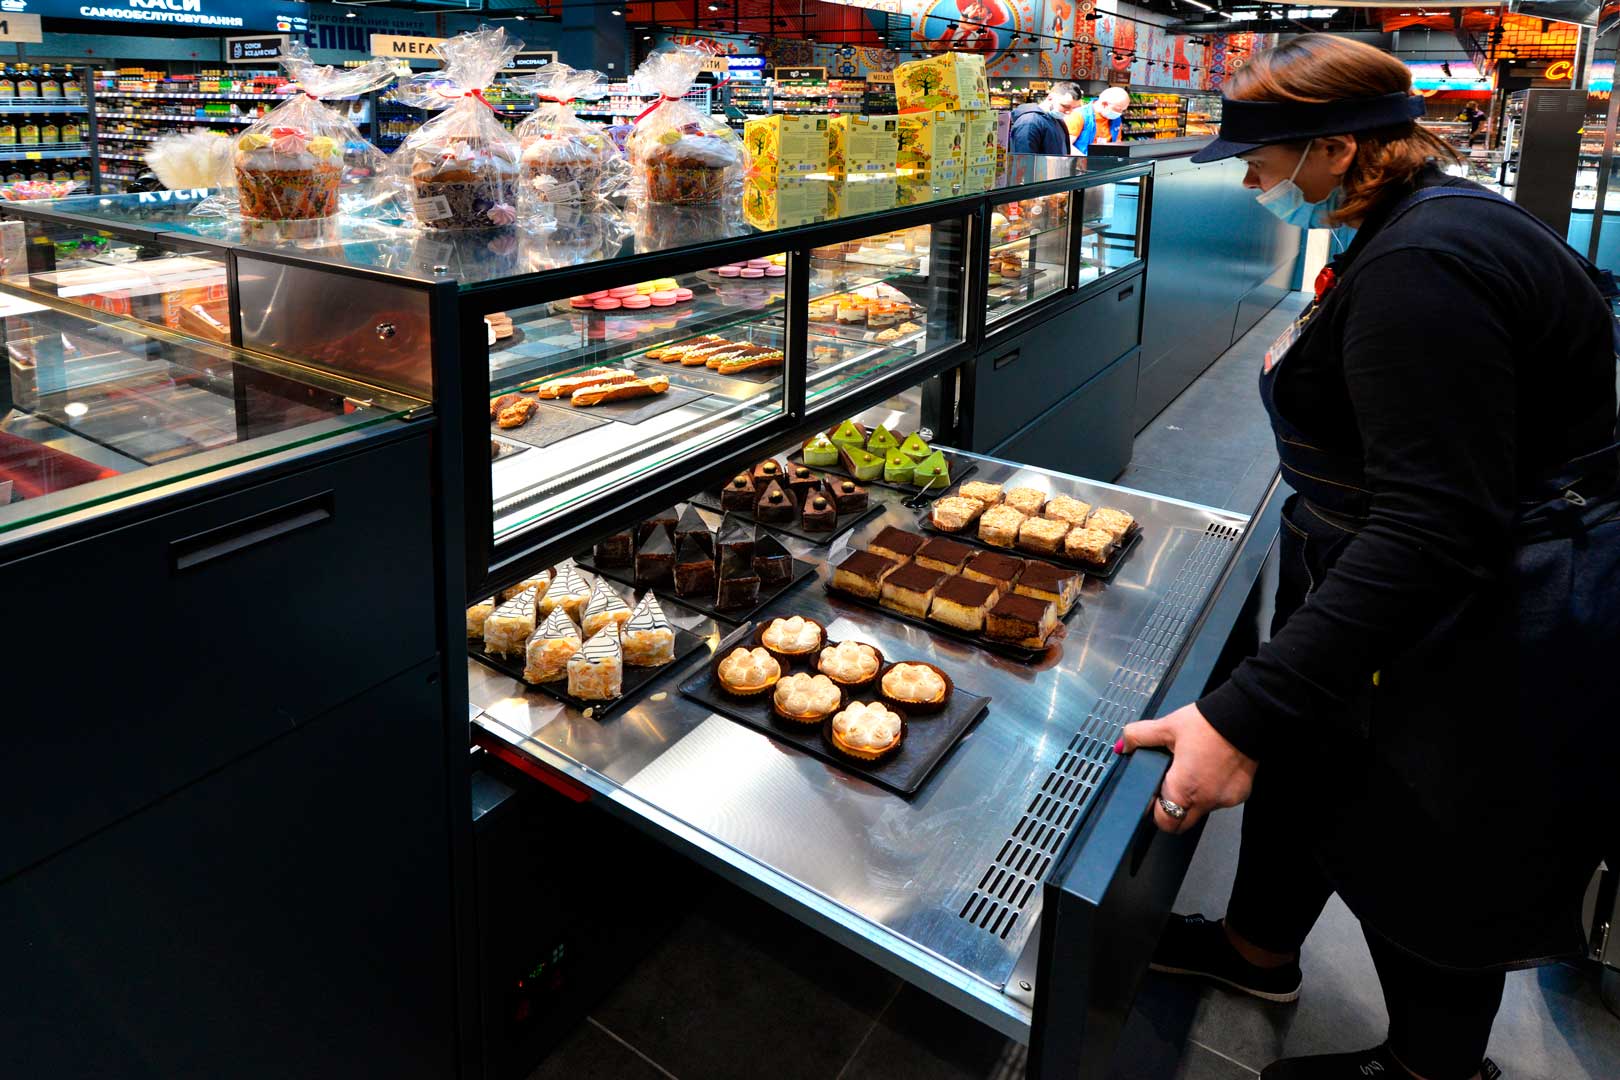 Counter for confectionery products Missouri MC 120 patisserie PS/OS M, supermarket "Epicentr" Kiev